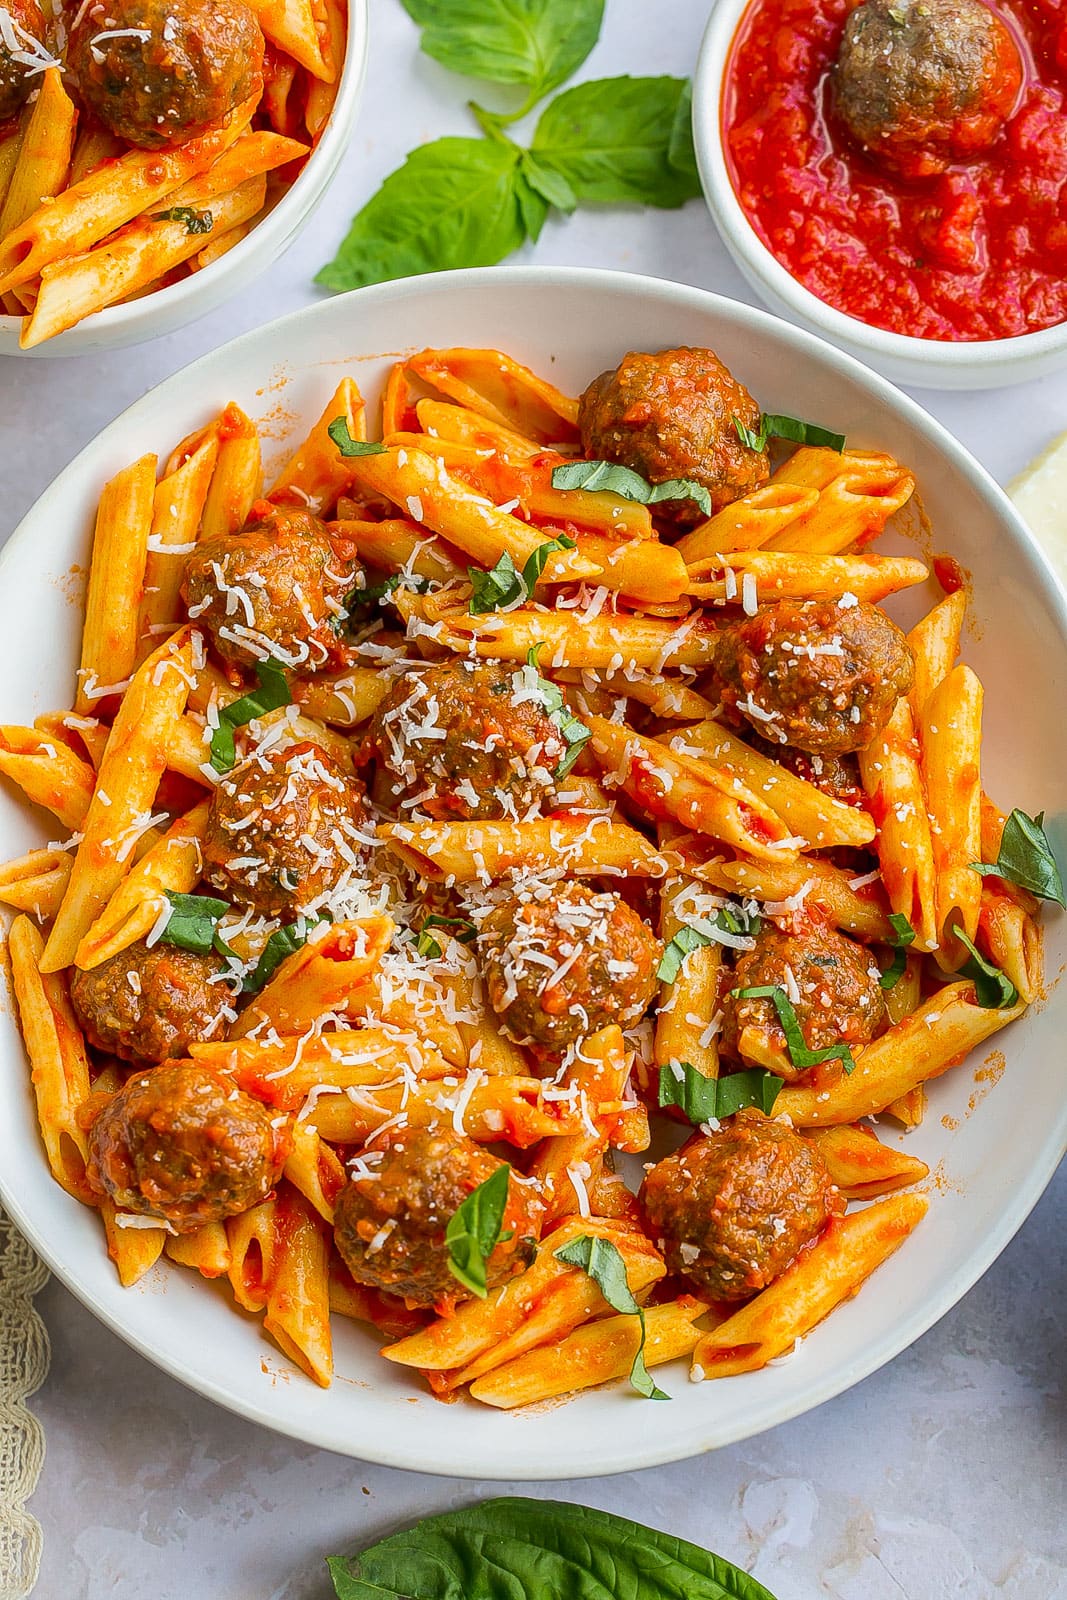 Meatball and pasta in a white bowl.